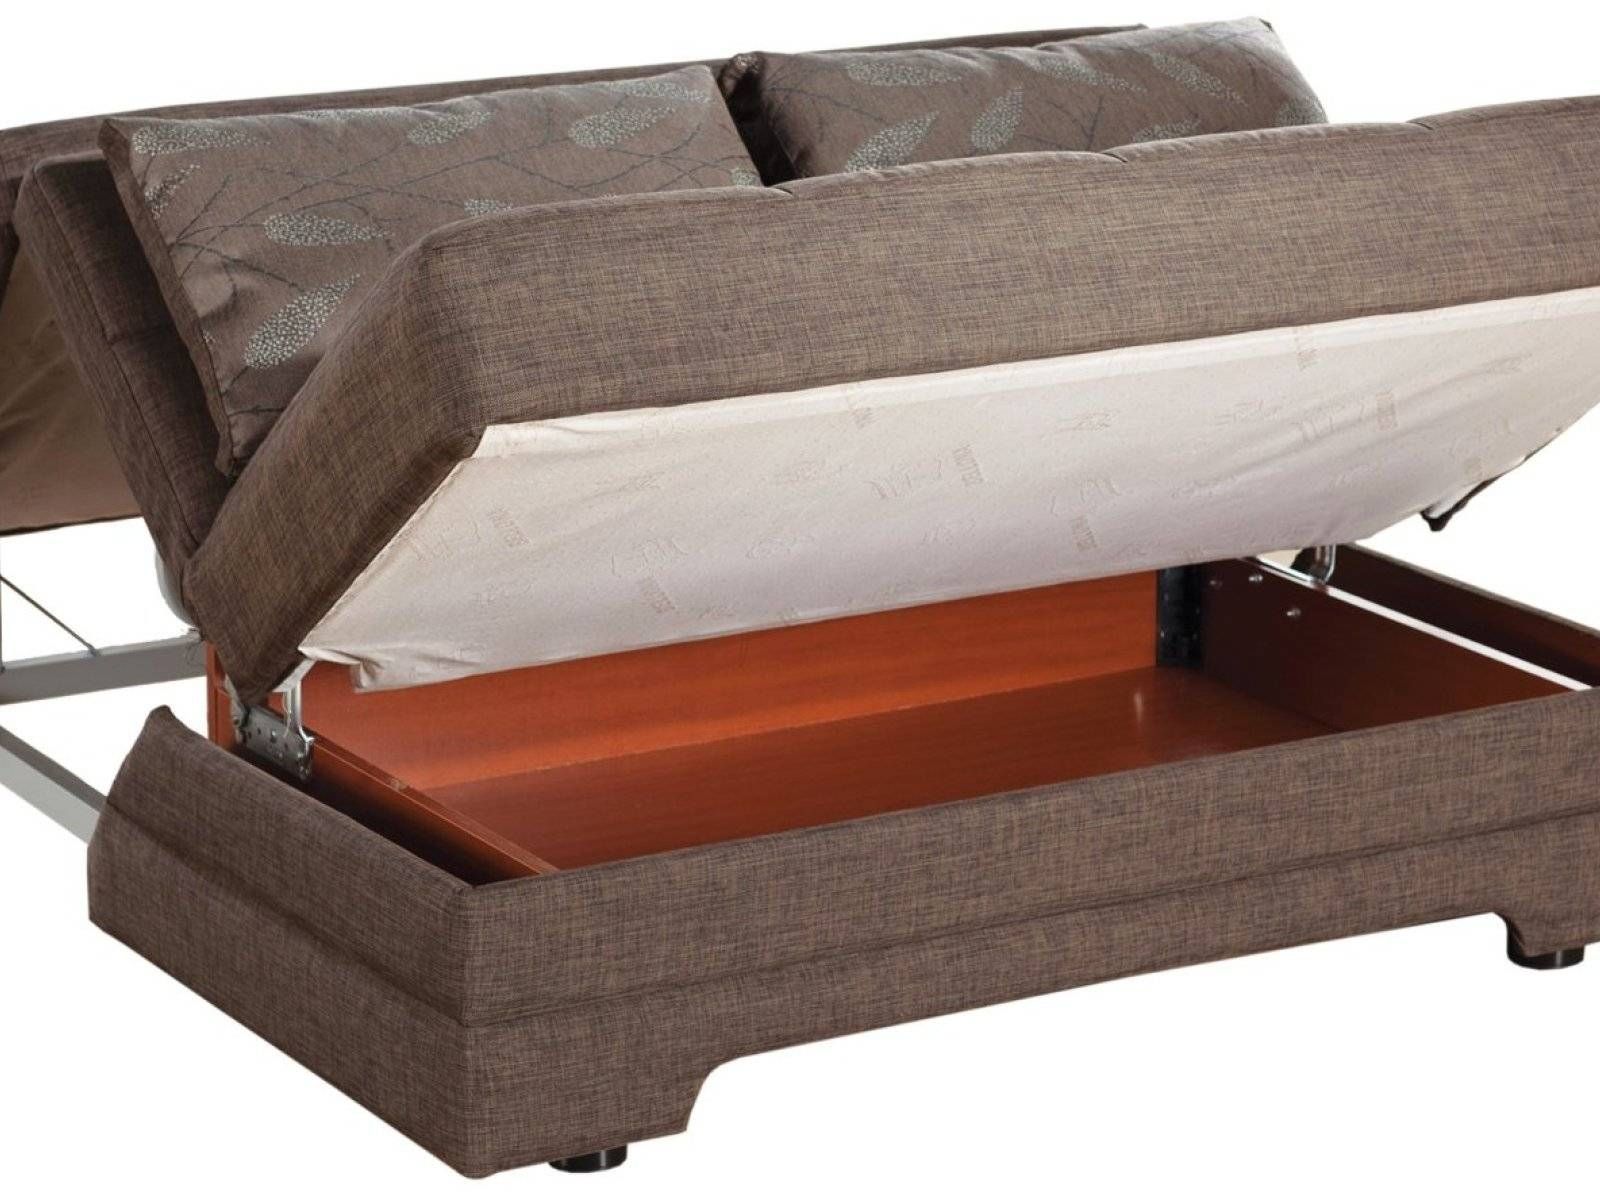 ▻ Sofa : 2 Good Queen Size Pull Out Sofa Bed 77 For Your Pull Out Regarding Pull Out Queen Size Bed Sofas (View 28 of 30)